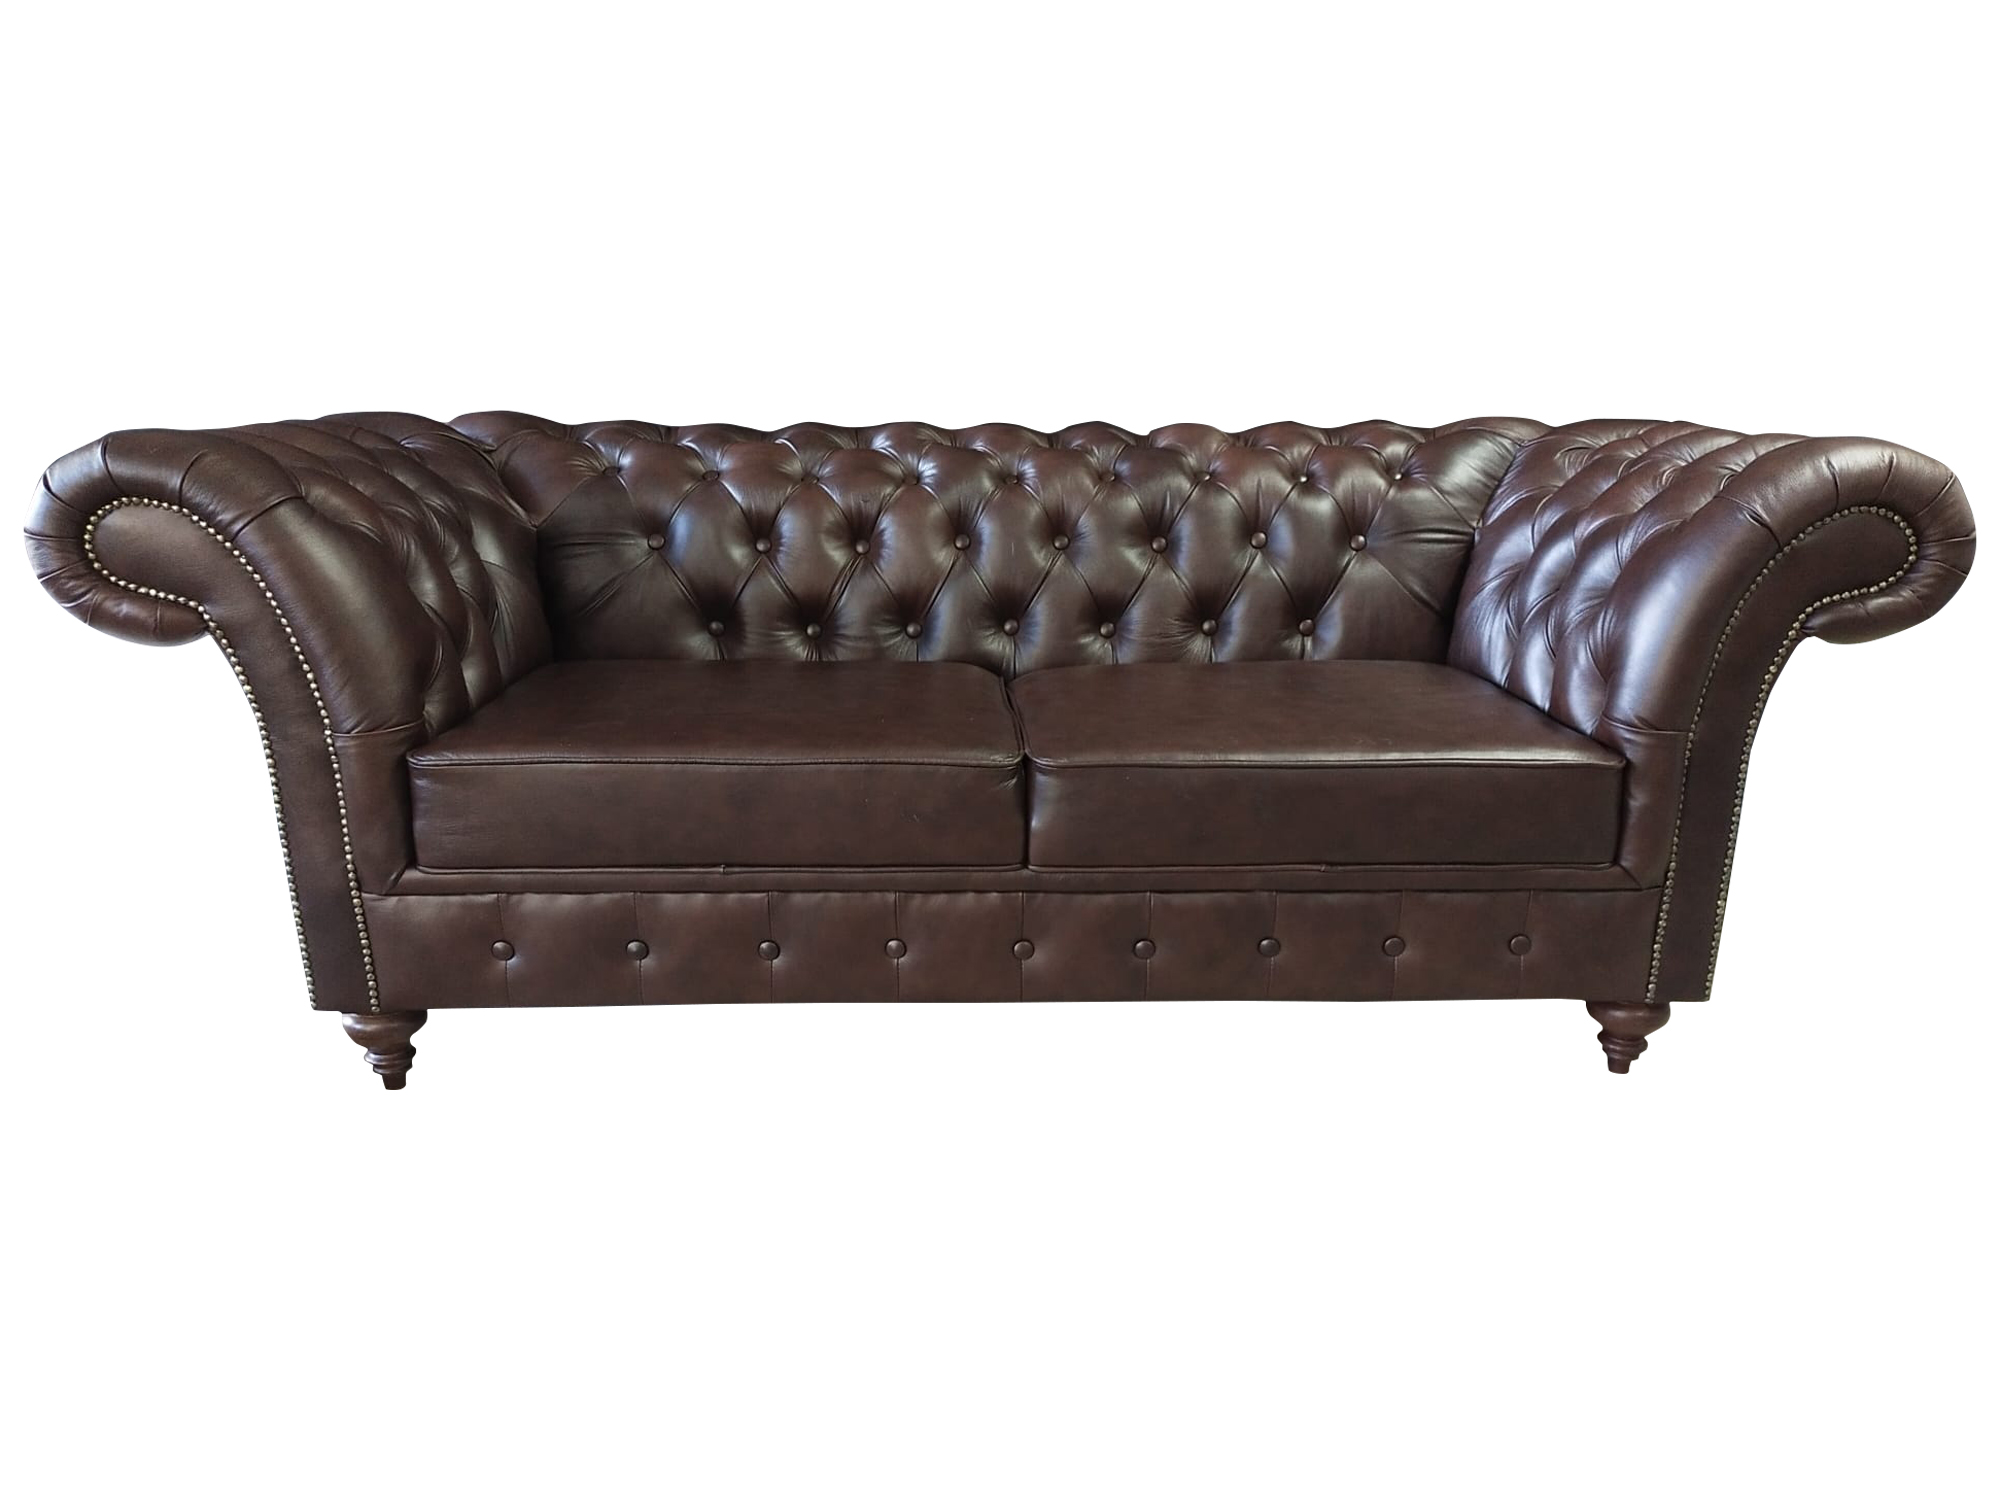 Chesterfield Sofa 3 Seater Couch Seat Luxury Couches Three Seater 230cm